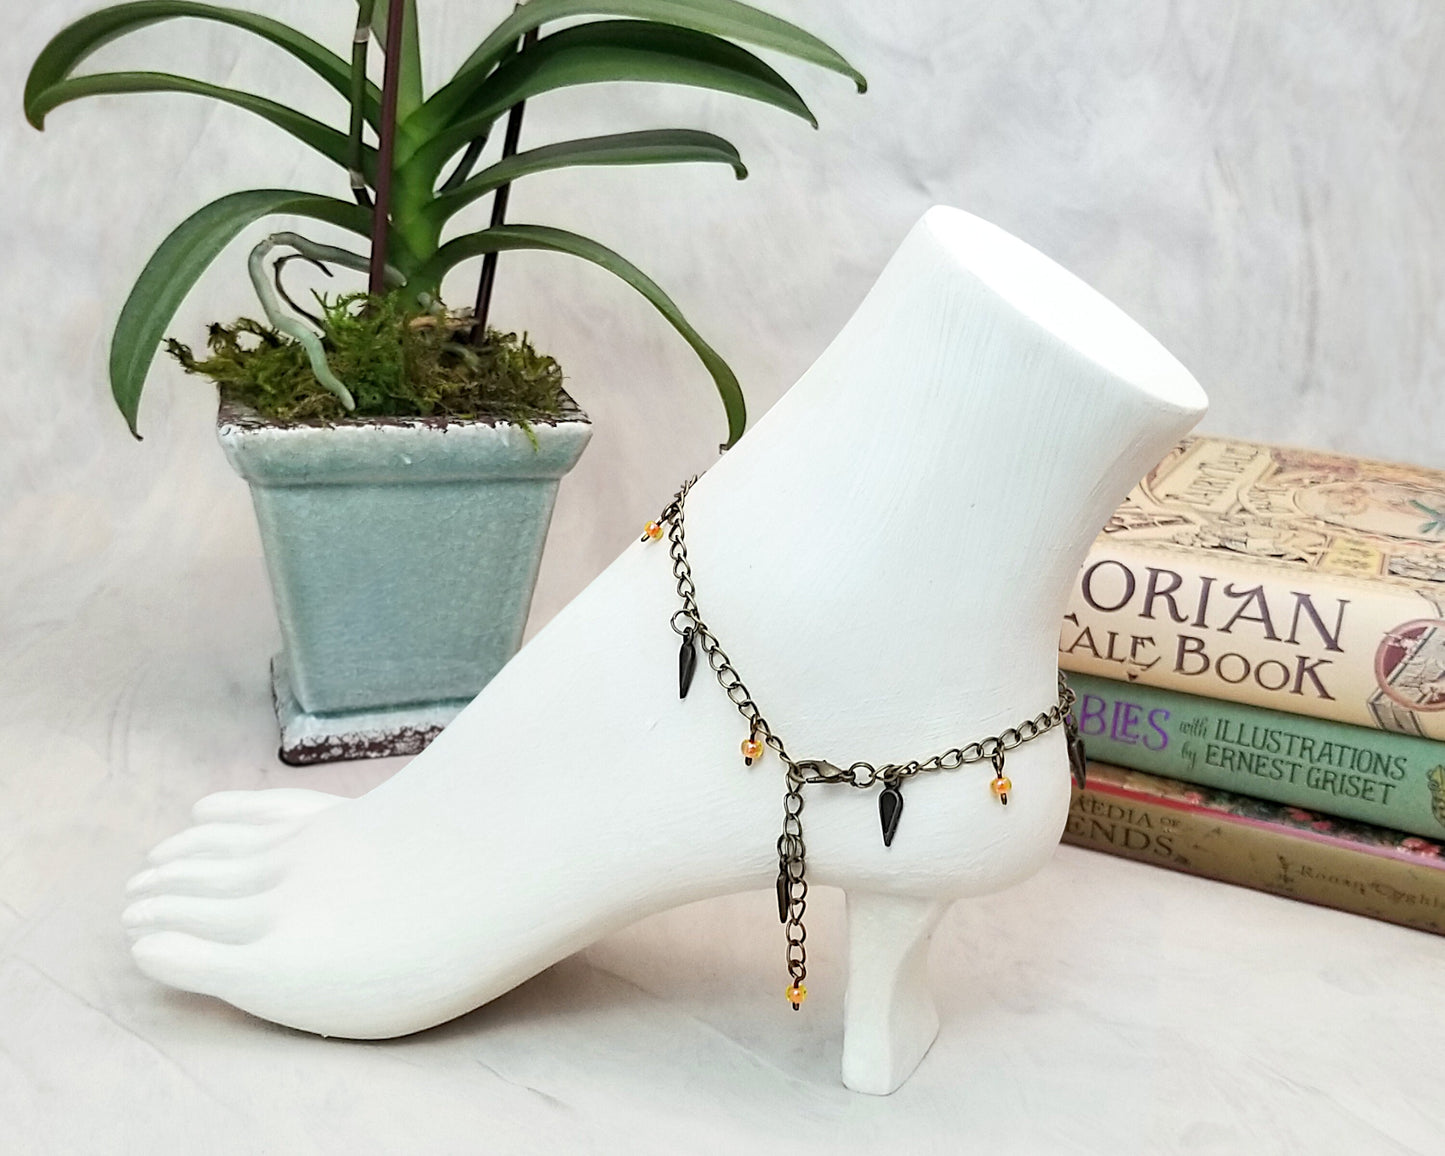 Chain Anklet or Bracelet in Orange, Adjustable, Beach, Boho, Bohemian, Gypsy, Steampunk, Choice of Colors and Metals